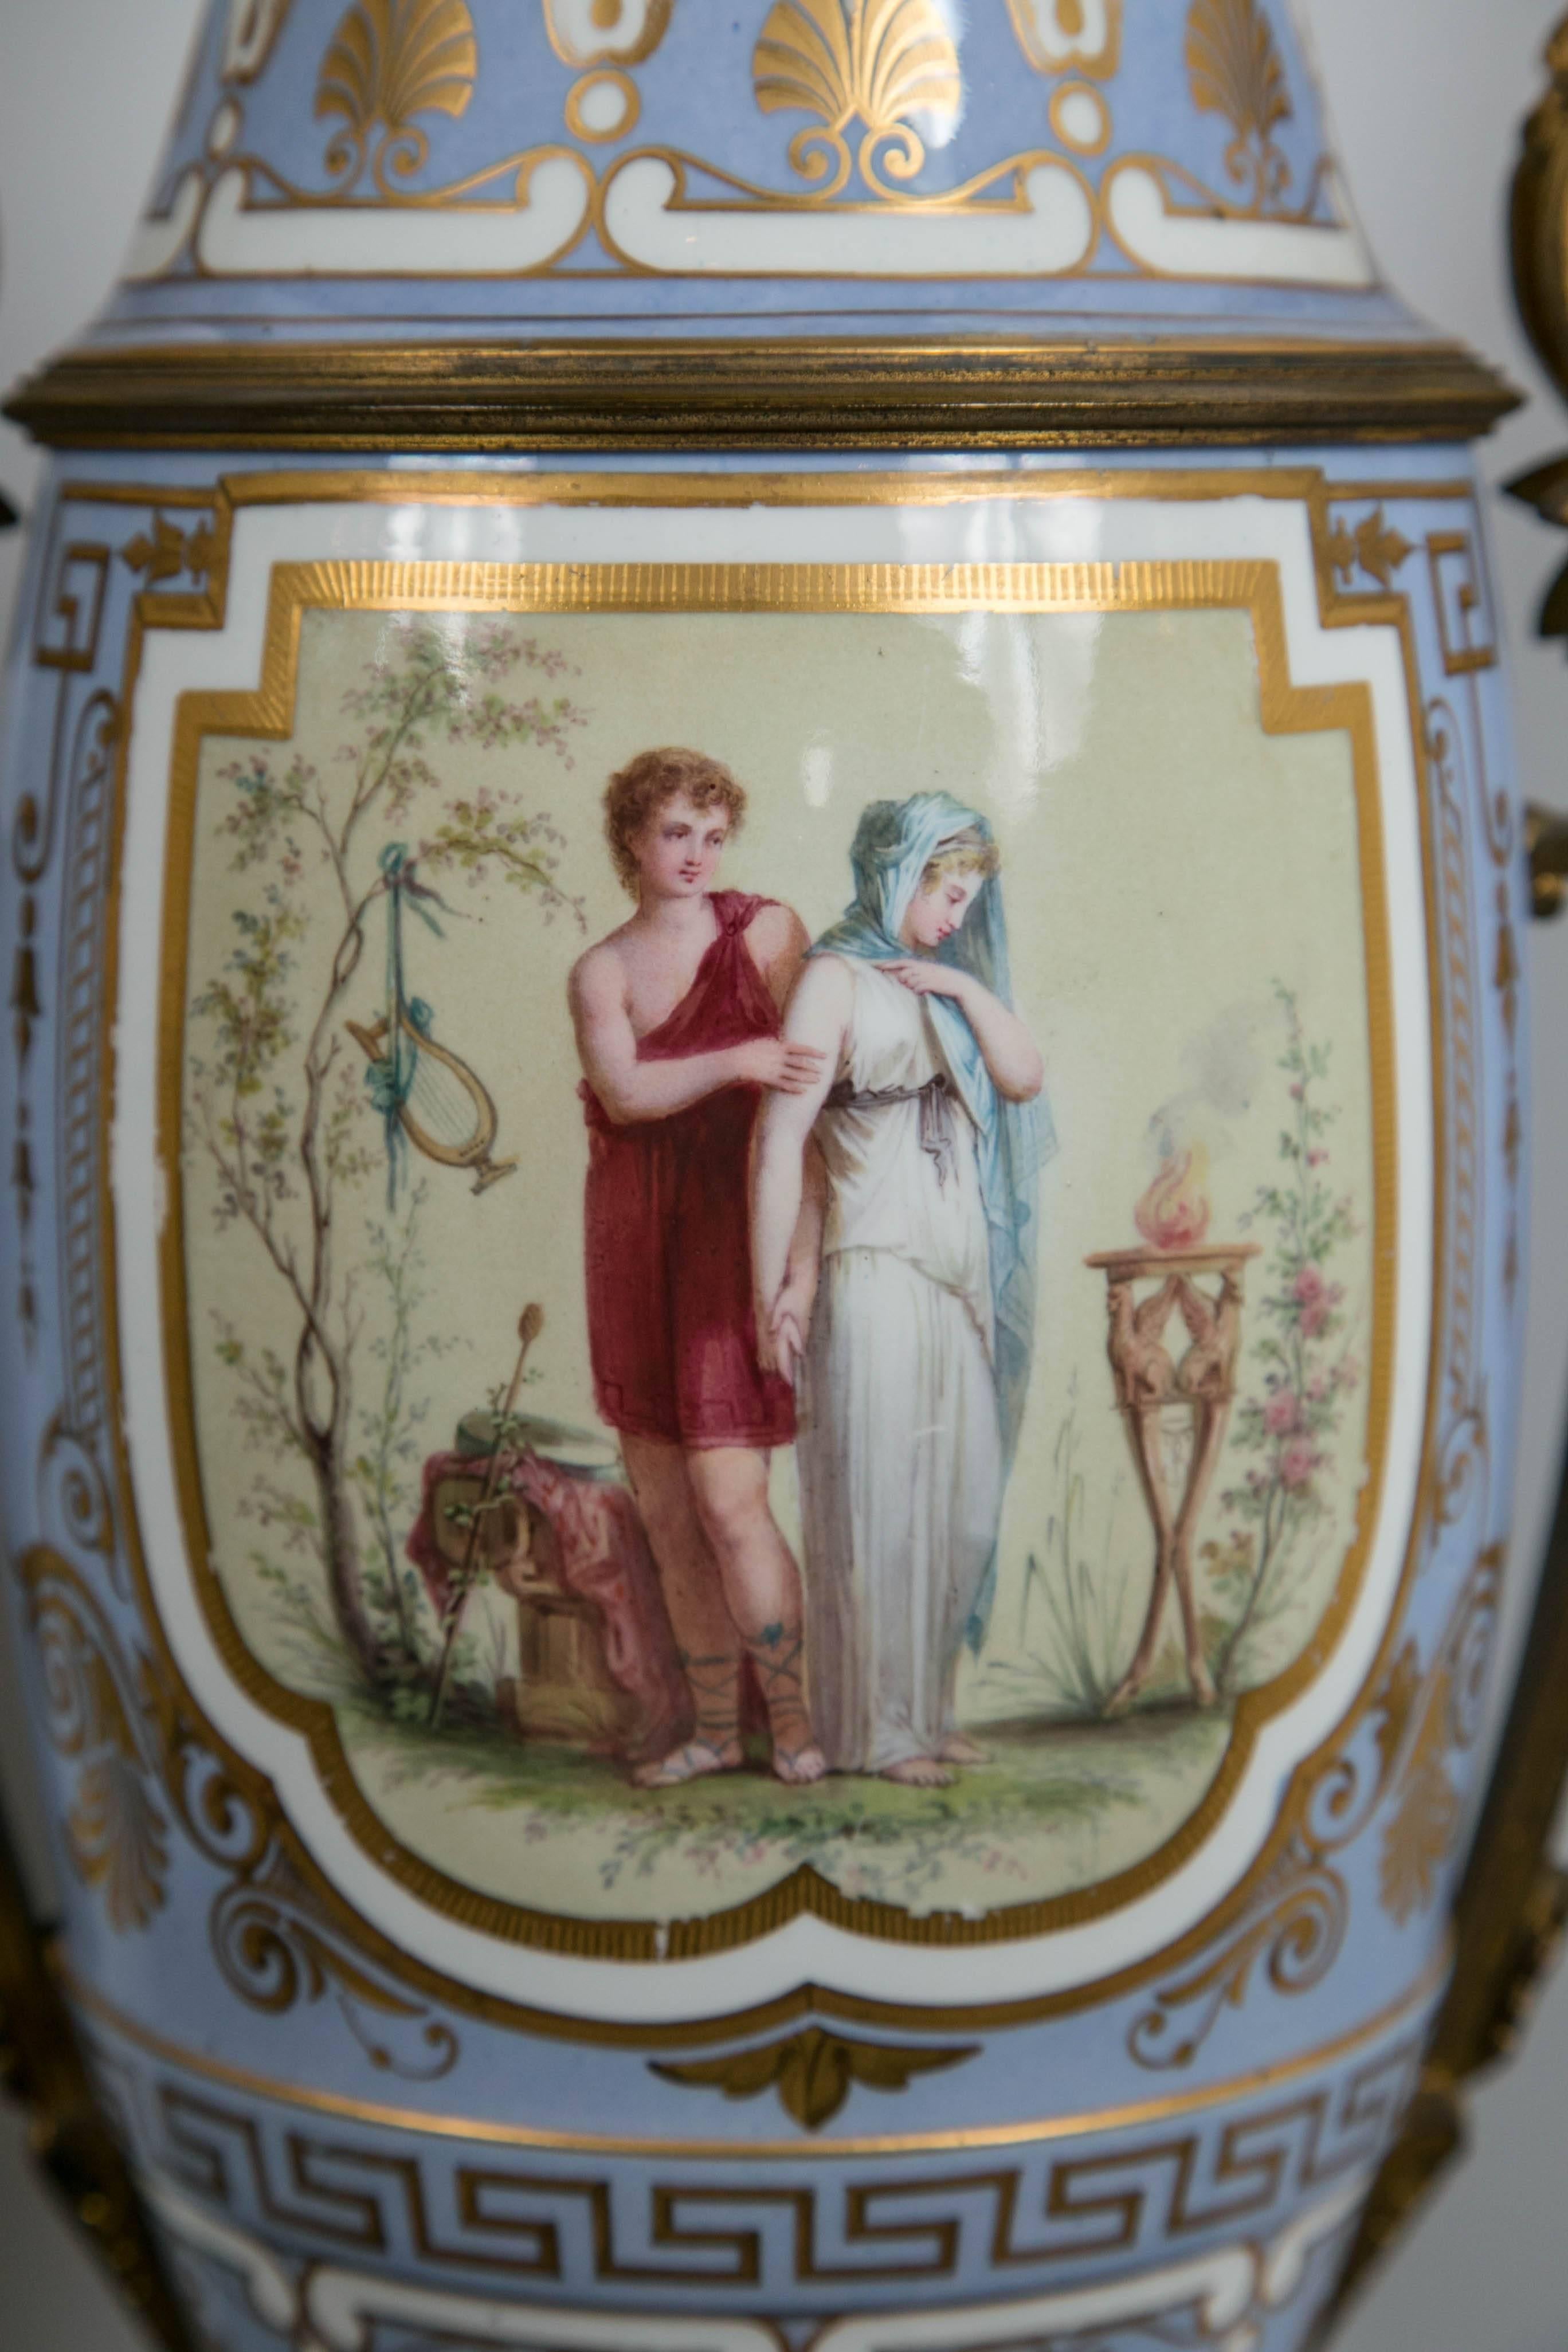 A beautiful pair of table lamps, made during the time that such were kerosene or oil burning. There is the original burner on top of the porcelain.
Pale blue ground surrounds hand-painted plaques of romantic couples, in the neoclassical manner. The